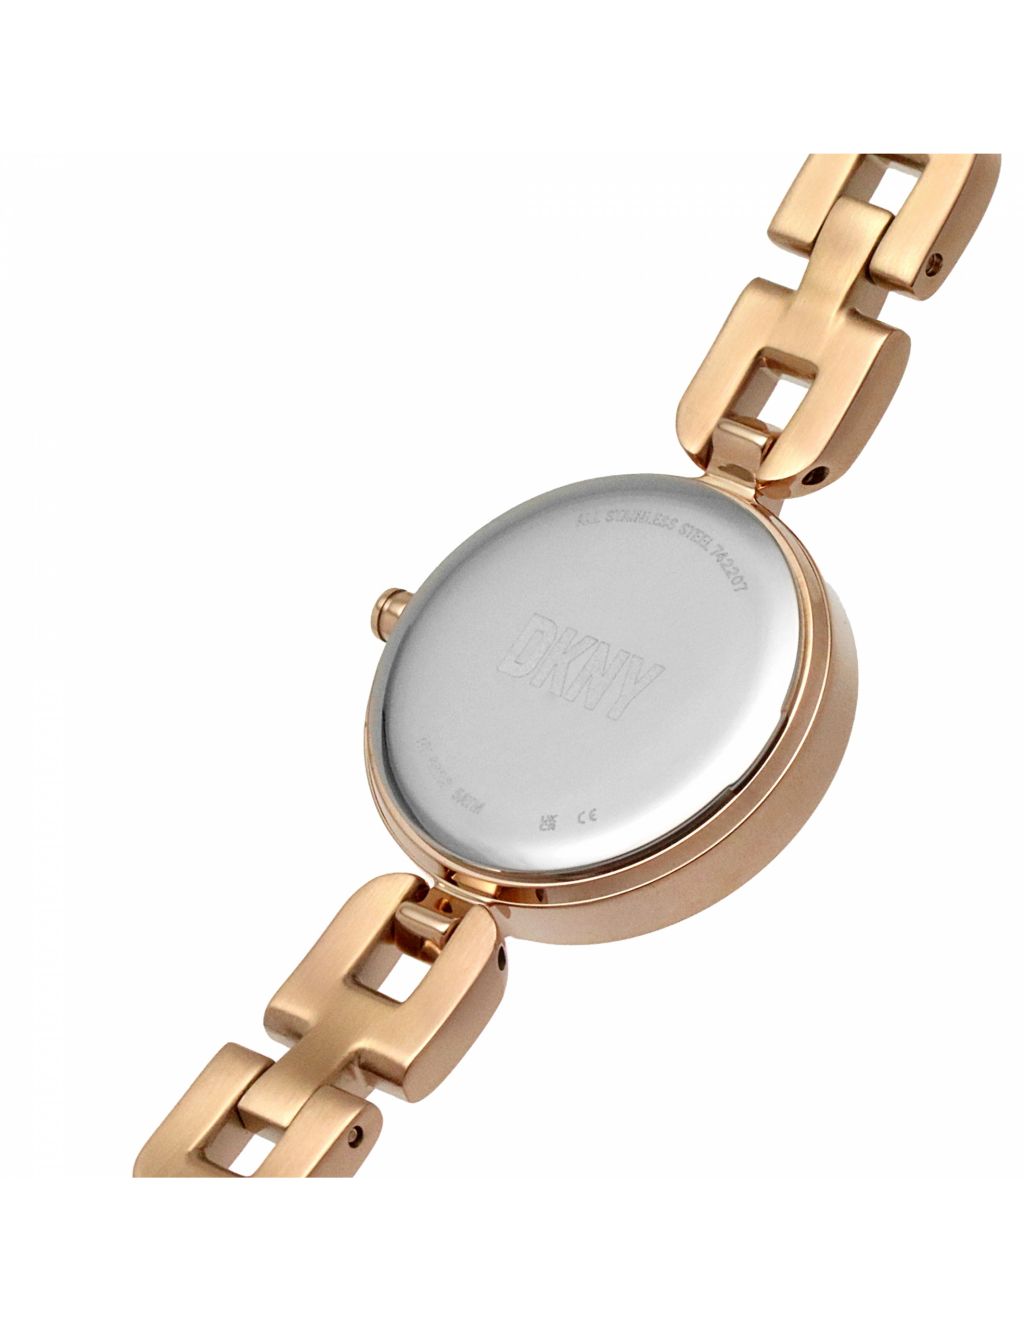 DKNY City Link Stainless Steel Watch image 6